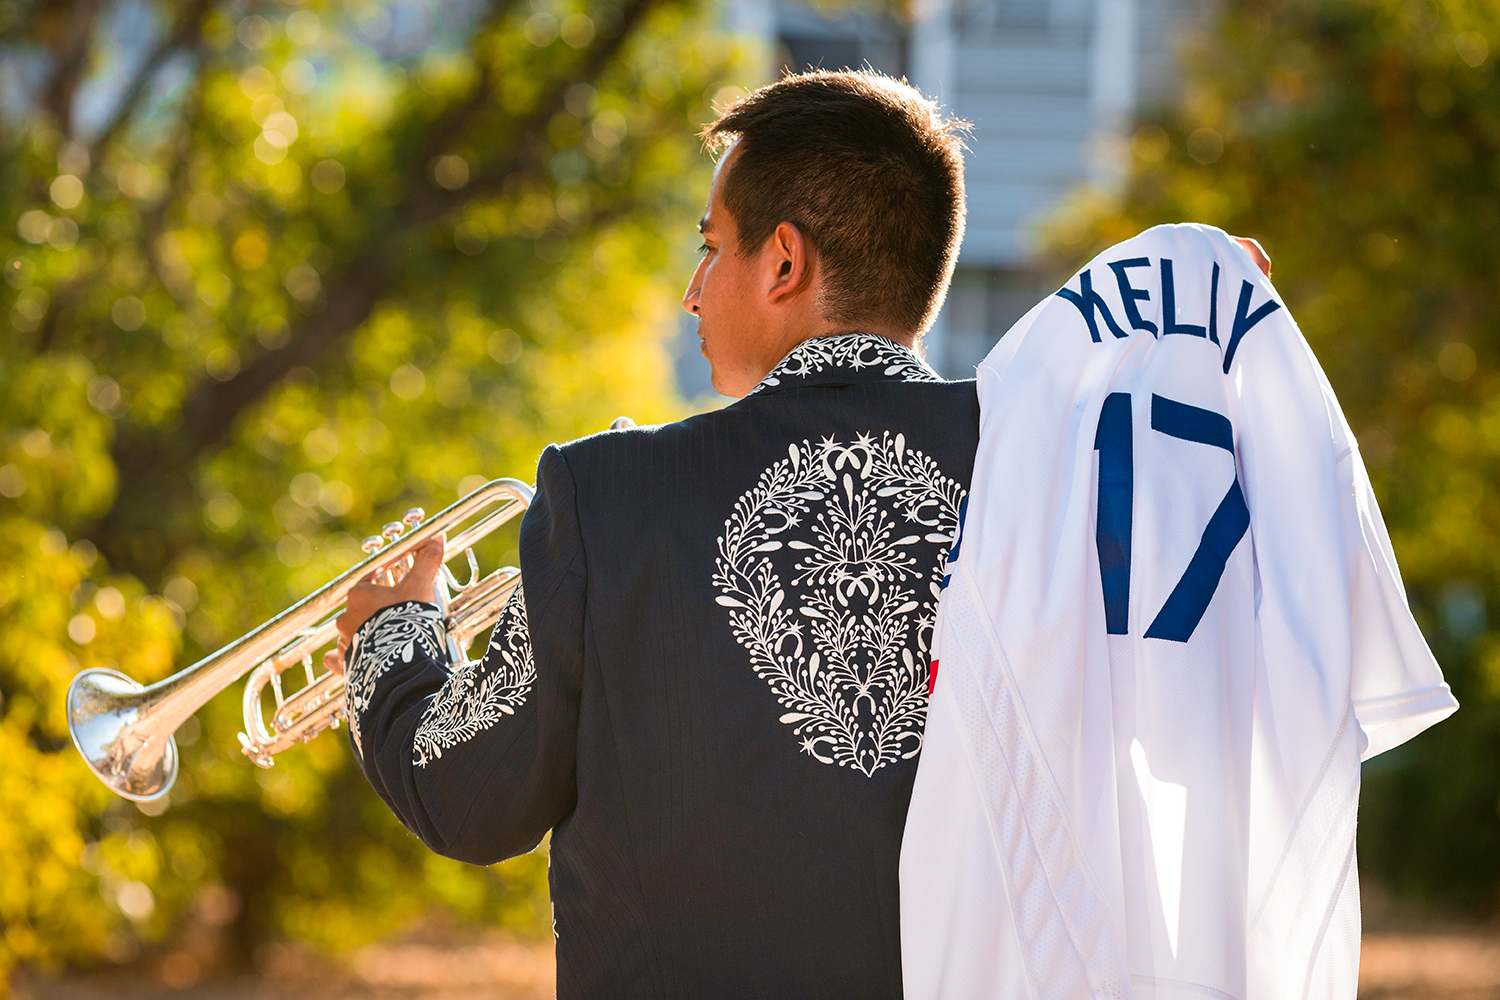 The story behind Joe Kelly's Mariachi jacket during Dodgers' White House  visit